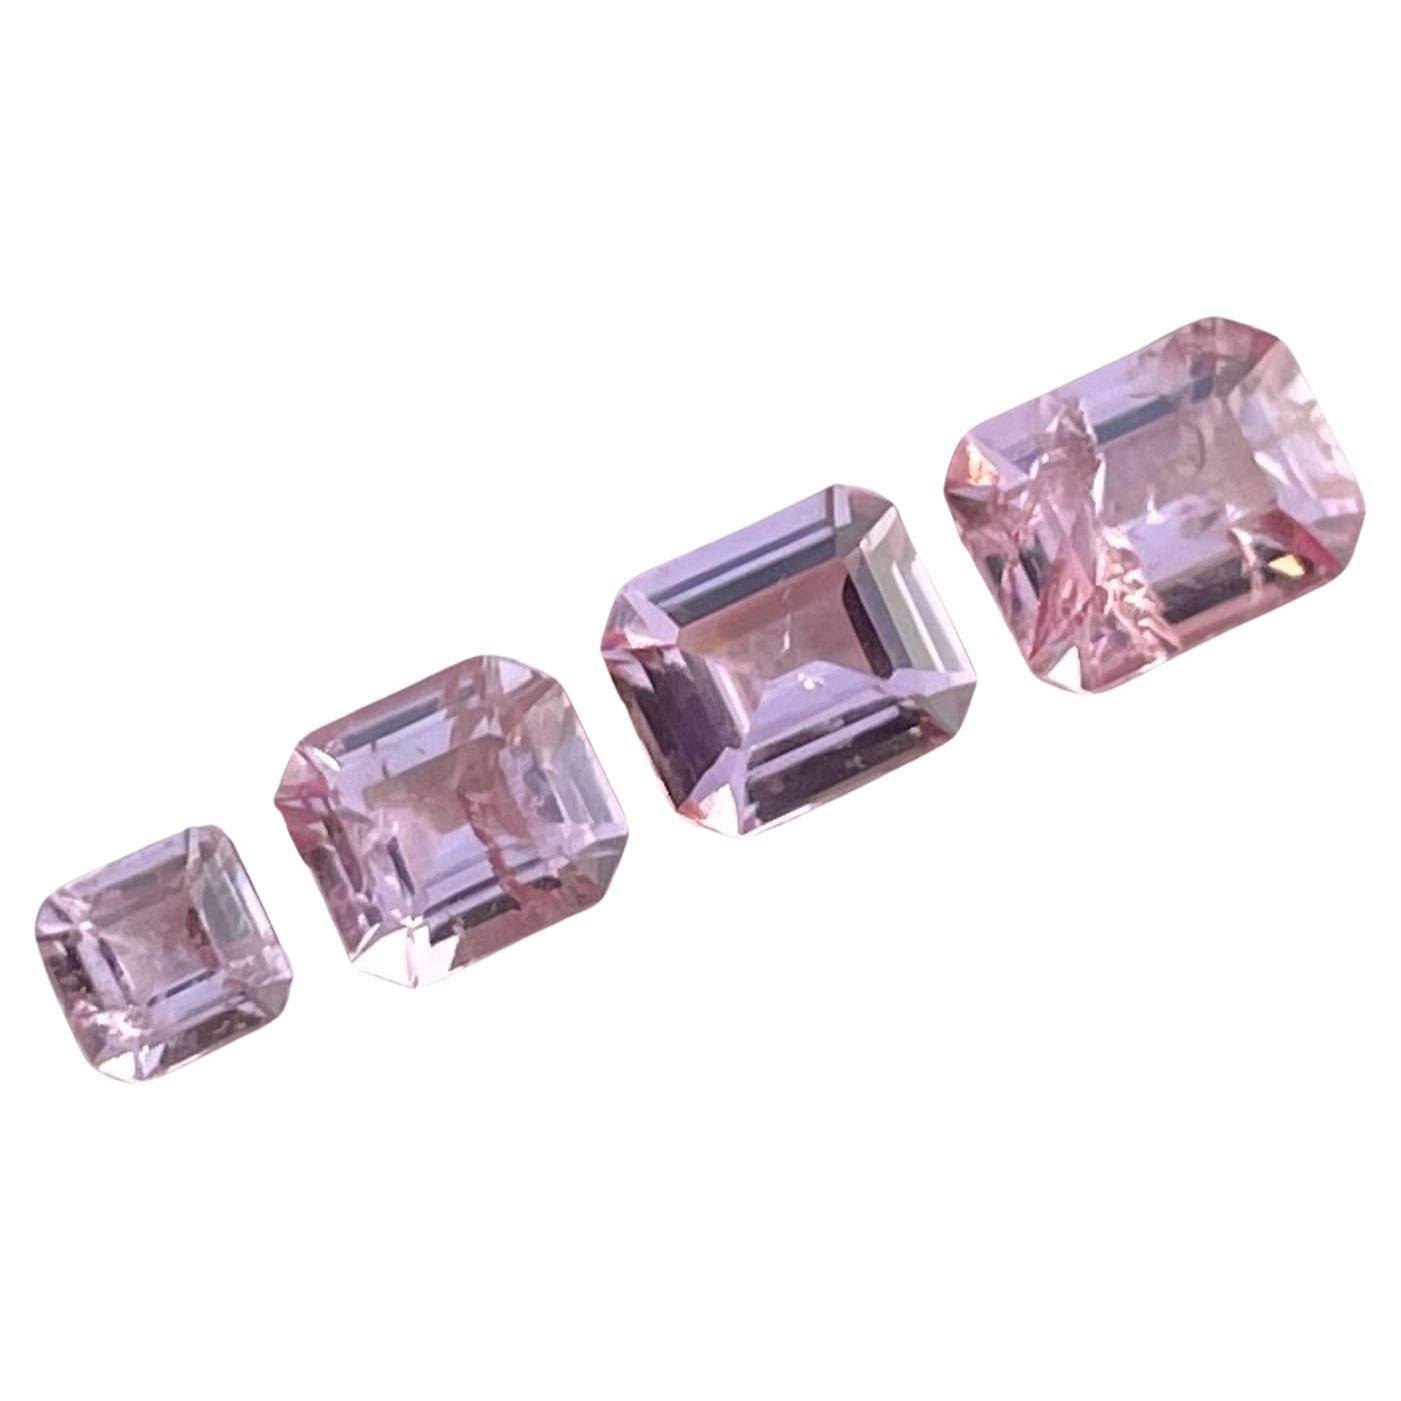 1.94 carats Pink Spinel Jewelry Batch Natural Loose Gemstones from Tajikistan For Sale